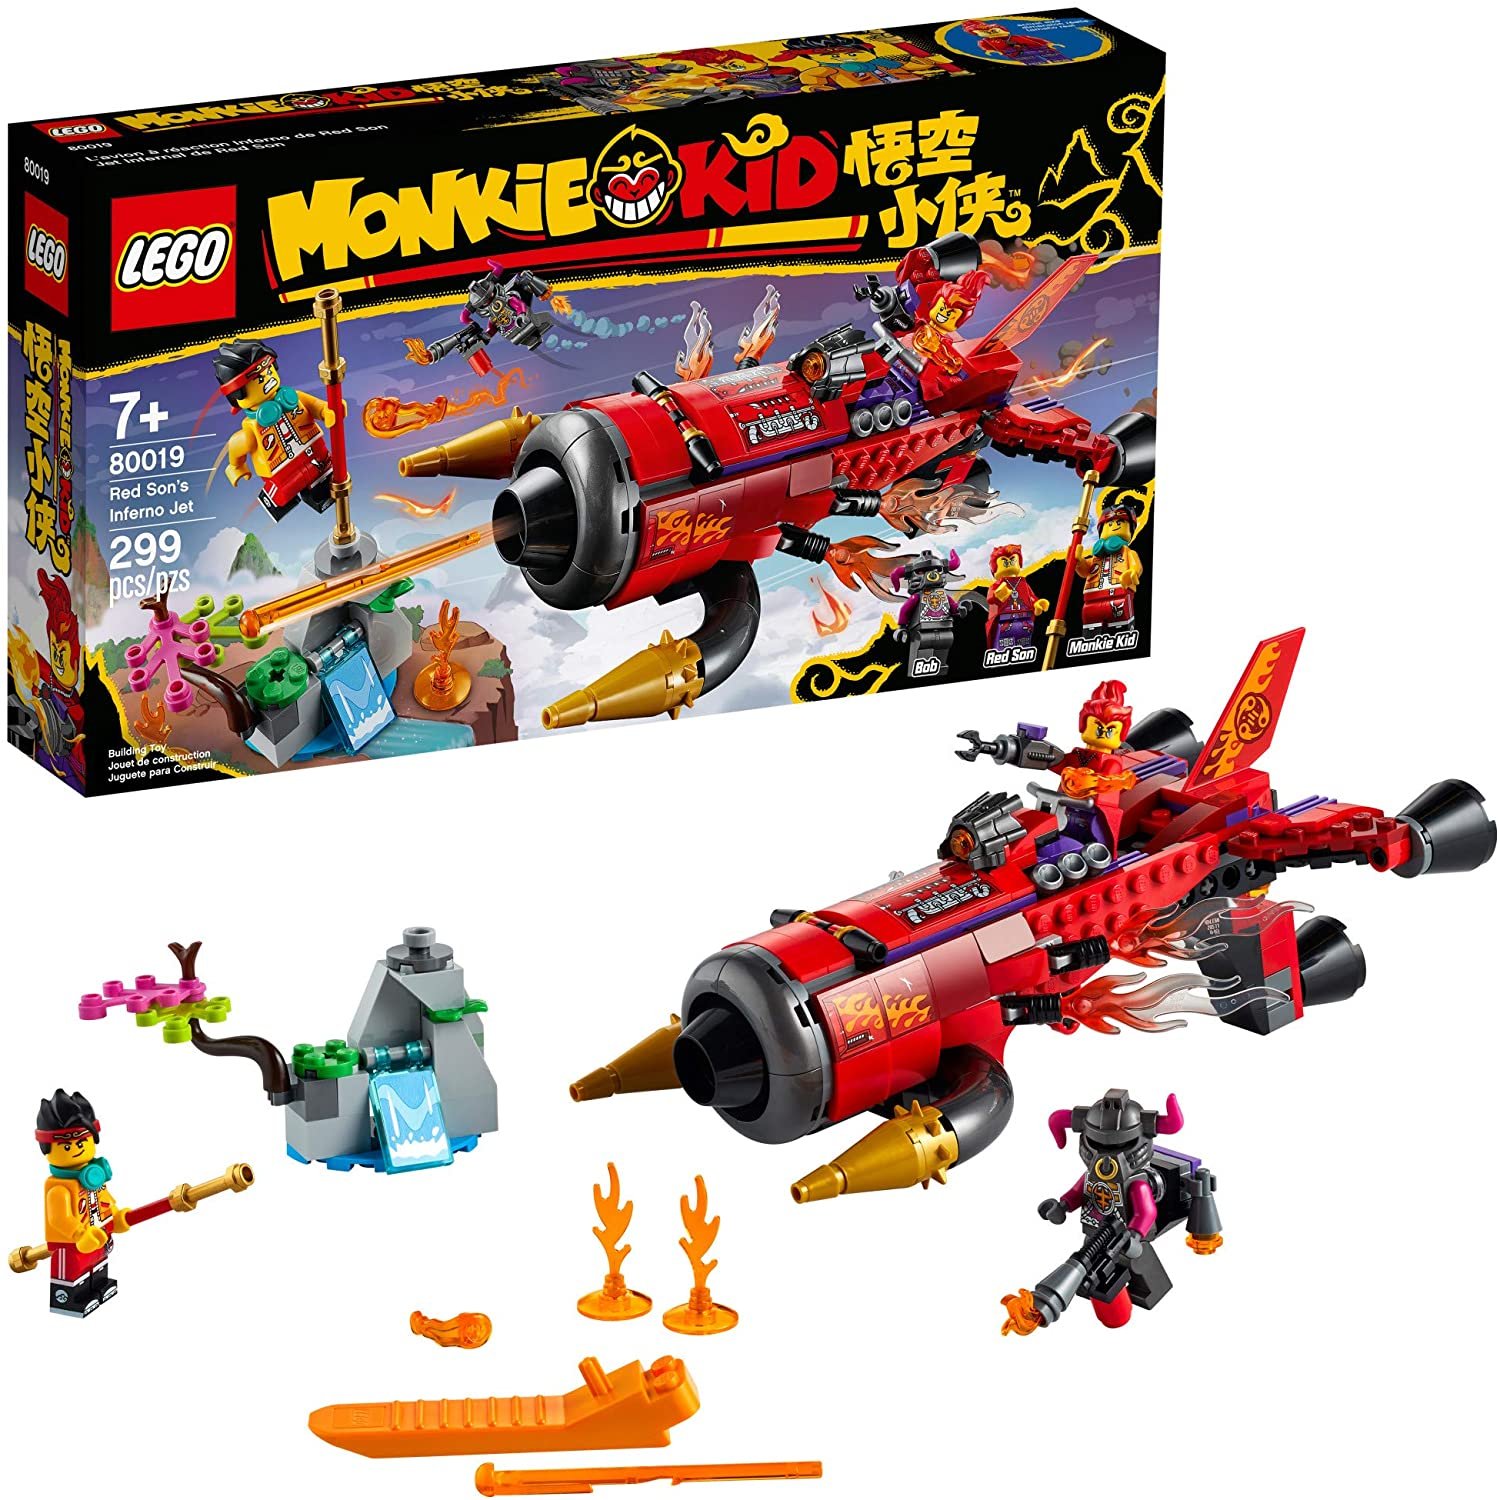 LEGO Monkie Kid Red Sonâ��s Inferno Jet 80019 Building Kit - 299 Pieces